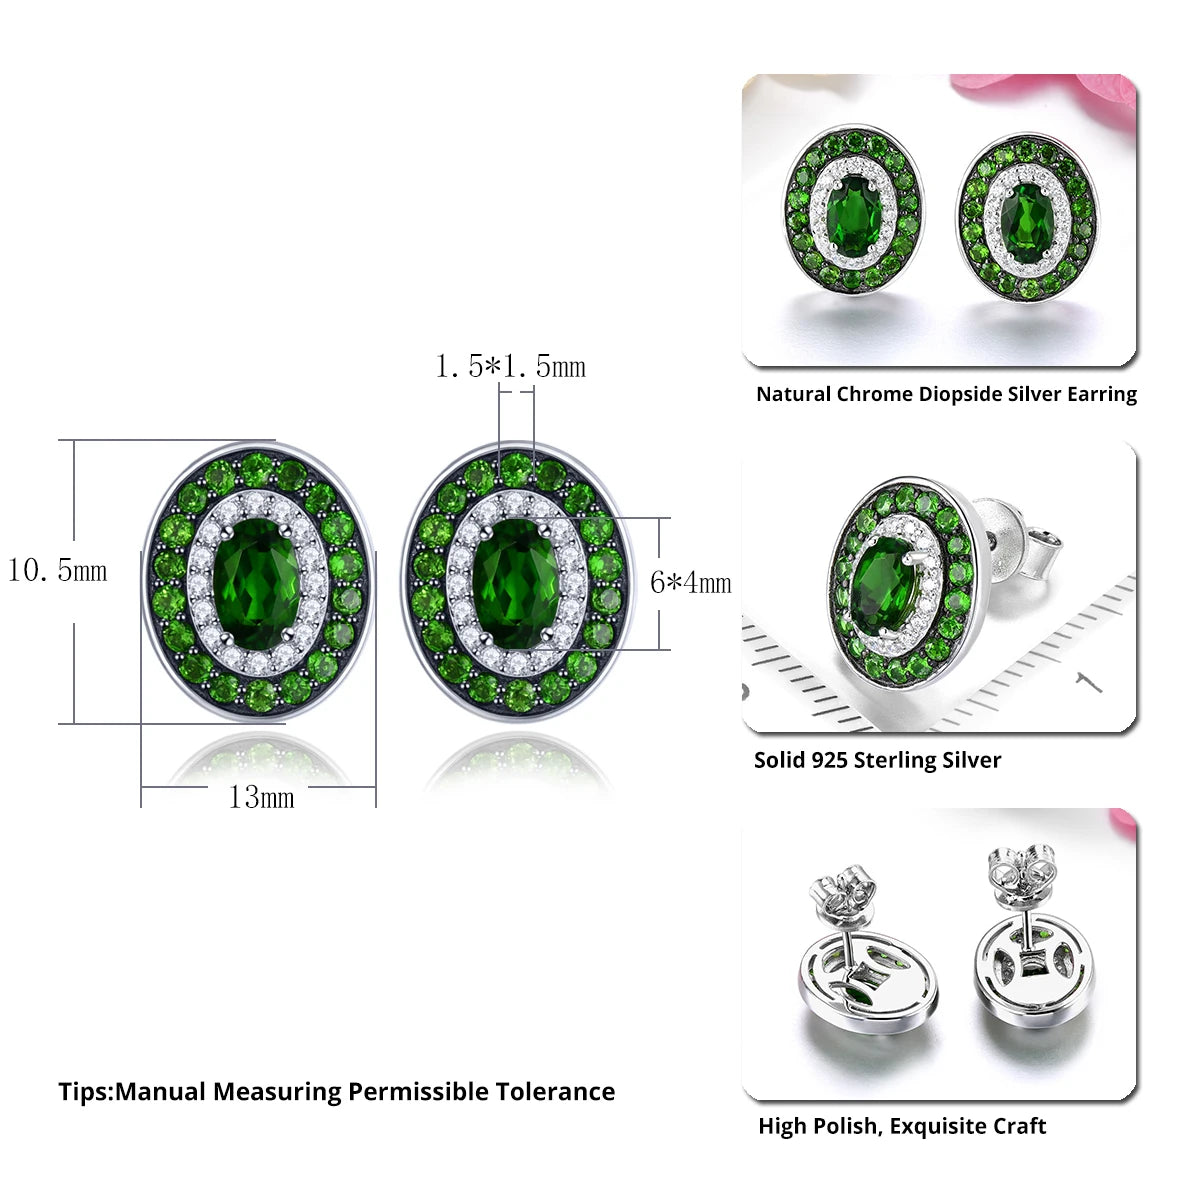 Natural Chrome Diopside Sterling Silver Stud Earring 2.2 Carats Gemstone Original Design Women Classic Elegant Jewelry Style